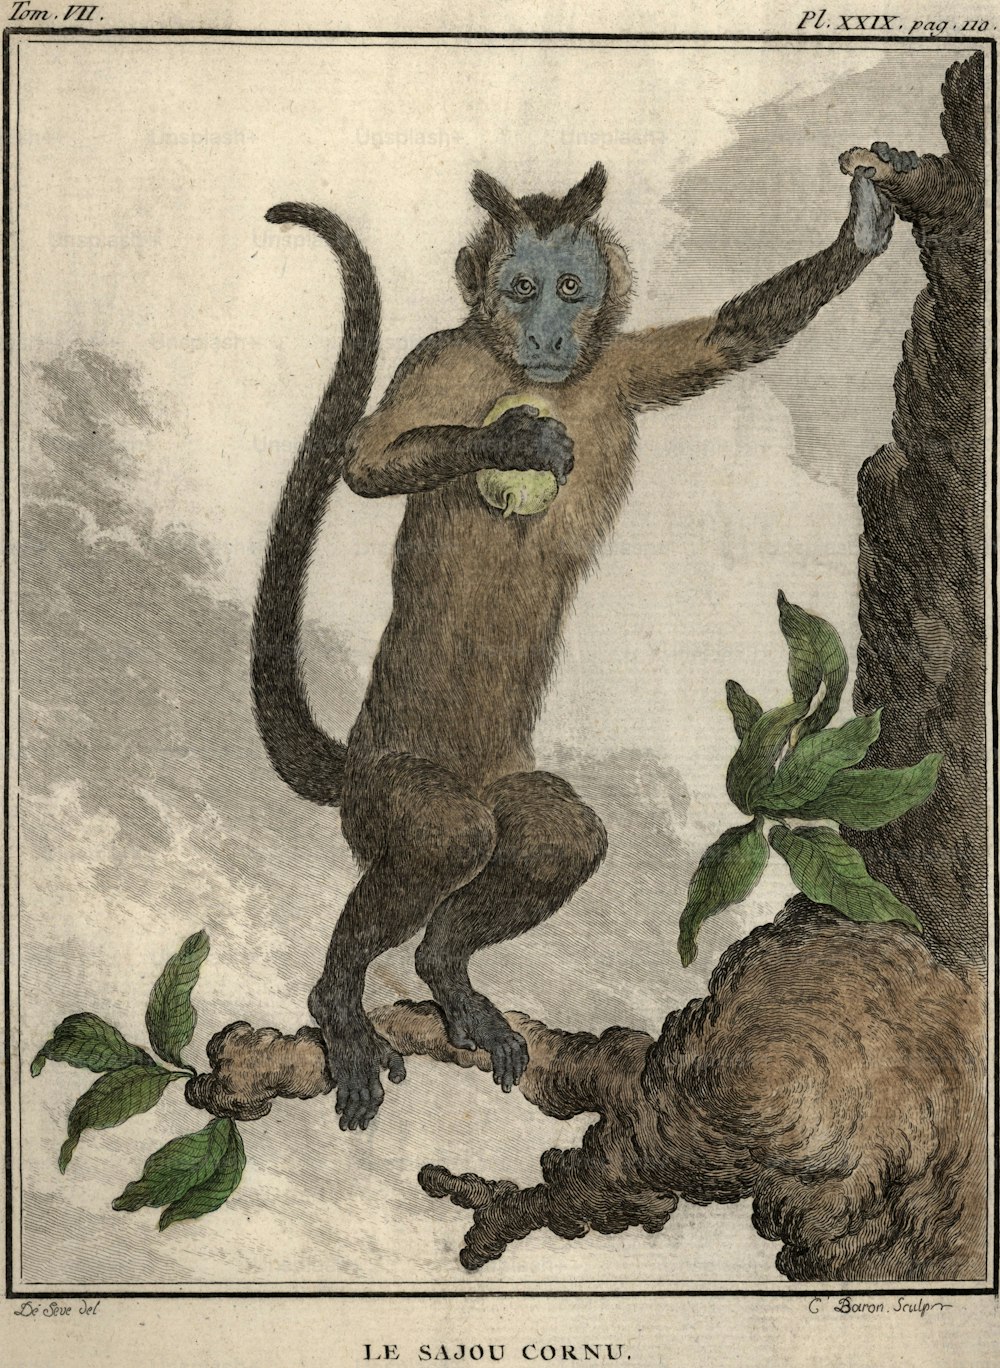 circa 1850:  A horned monkey with a blue face. Original Artwork: Engraving by C Baron after De Seve.  (Photo by Hulton Archive/Getty Images)